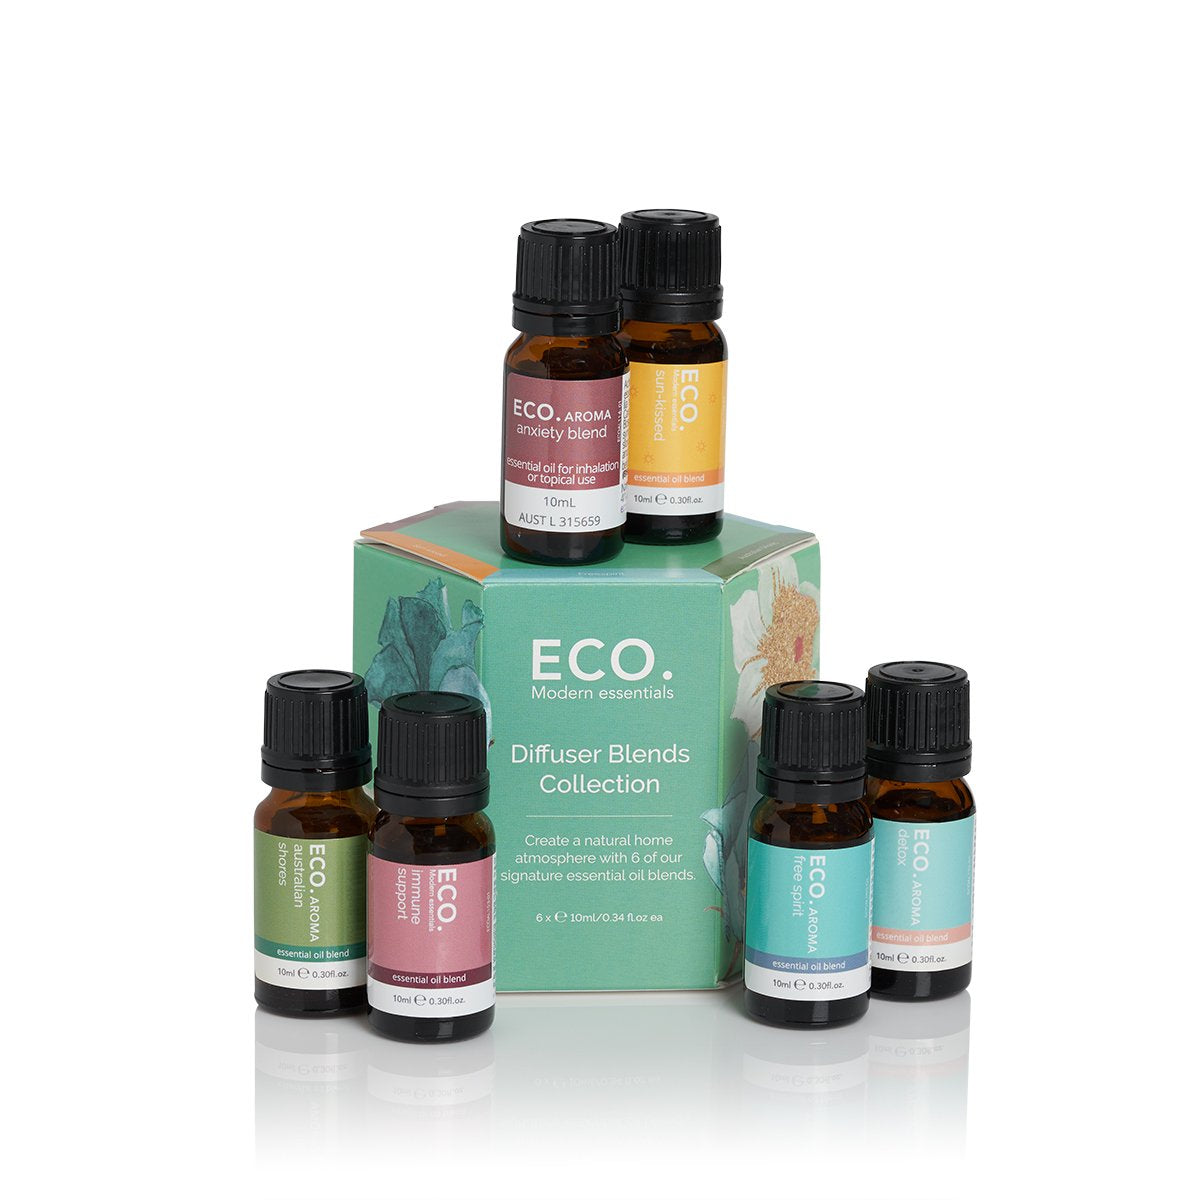 Essential Oils | ECO. Diffuser Blends Collection 6 Pack